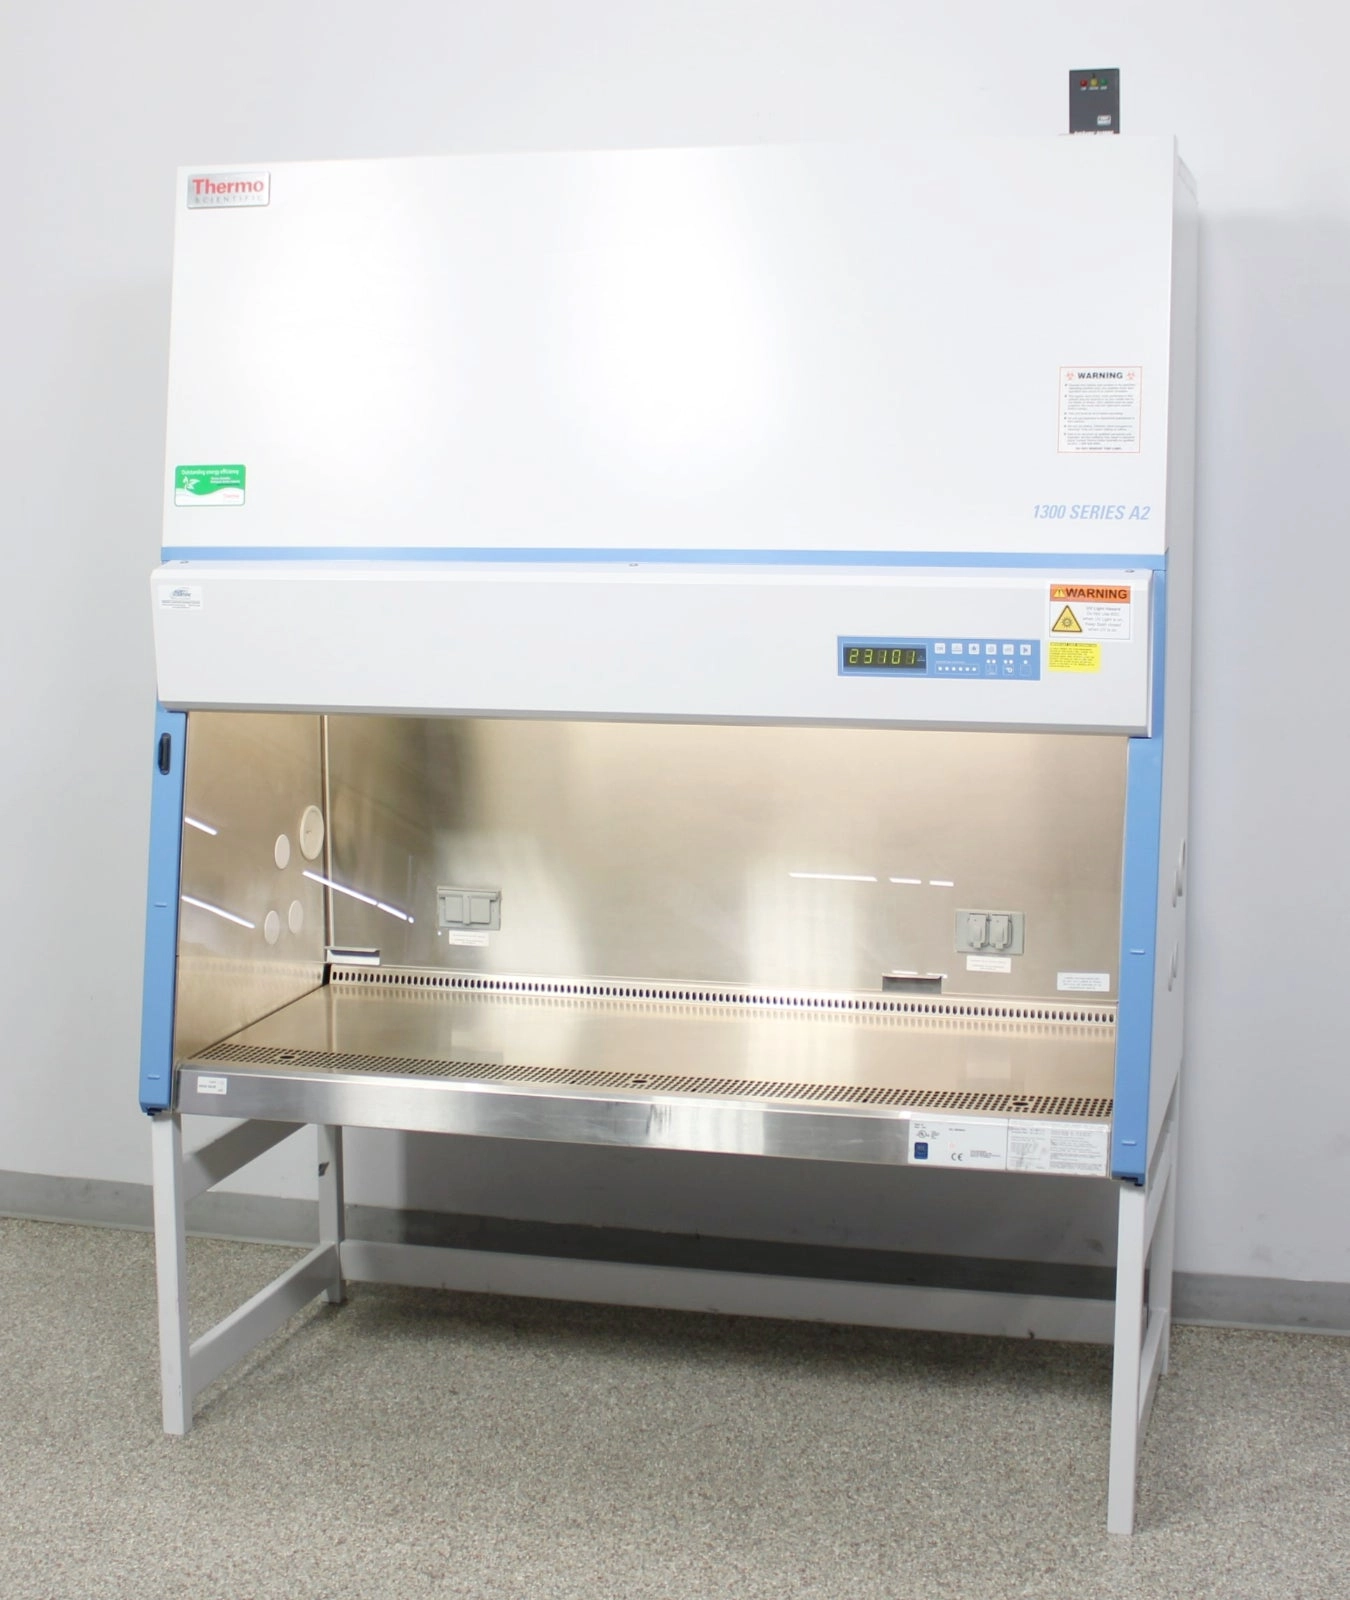 Thermo Scientific 1300 Series A2 5ft